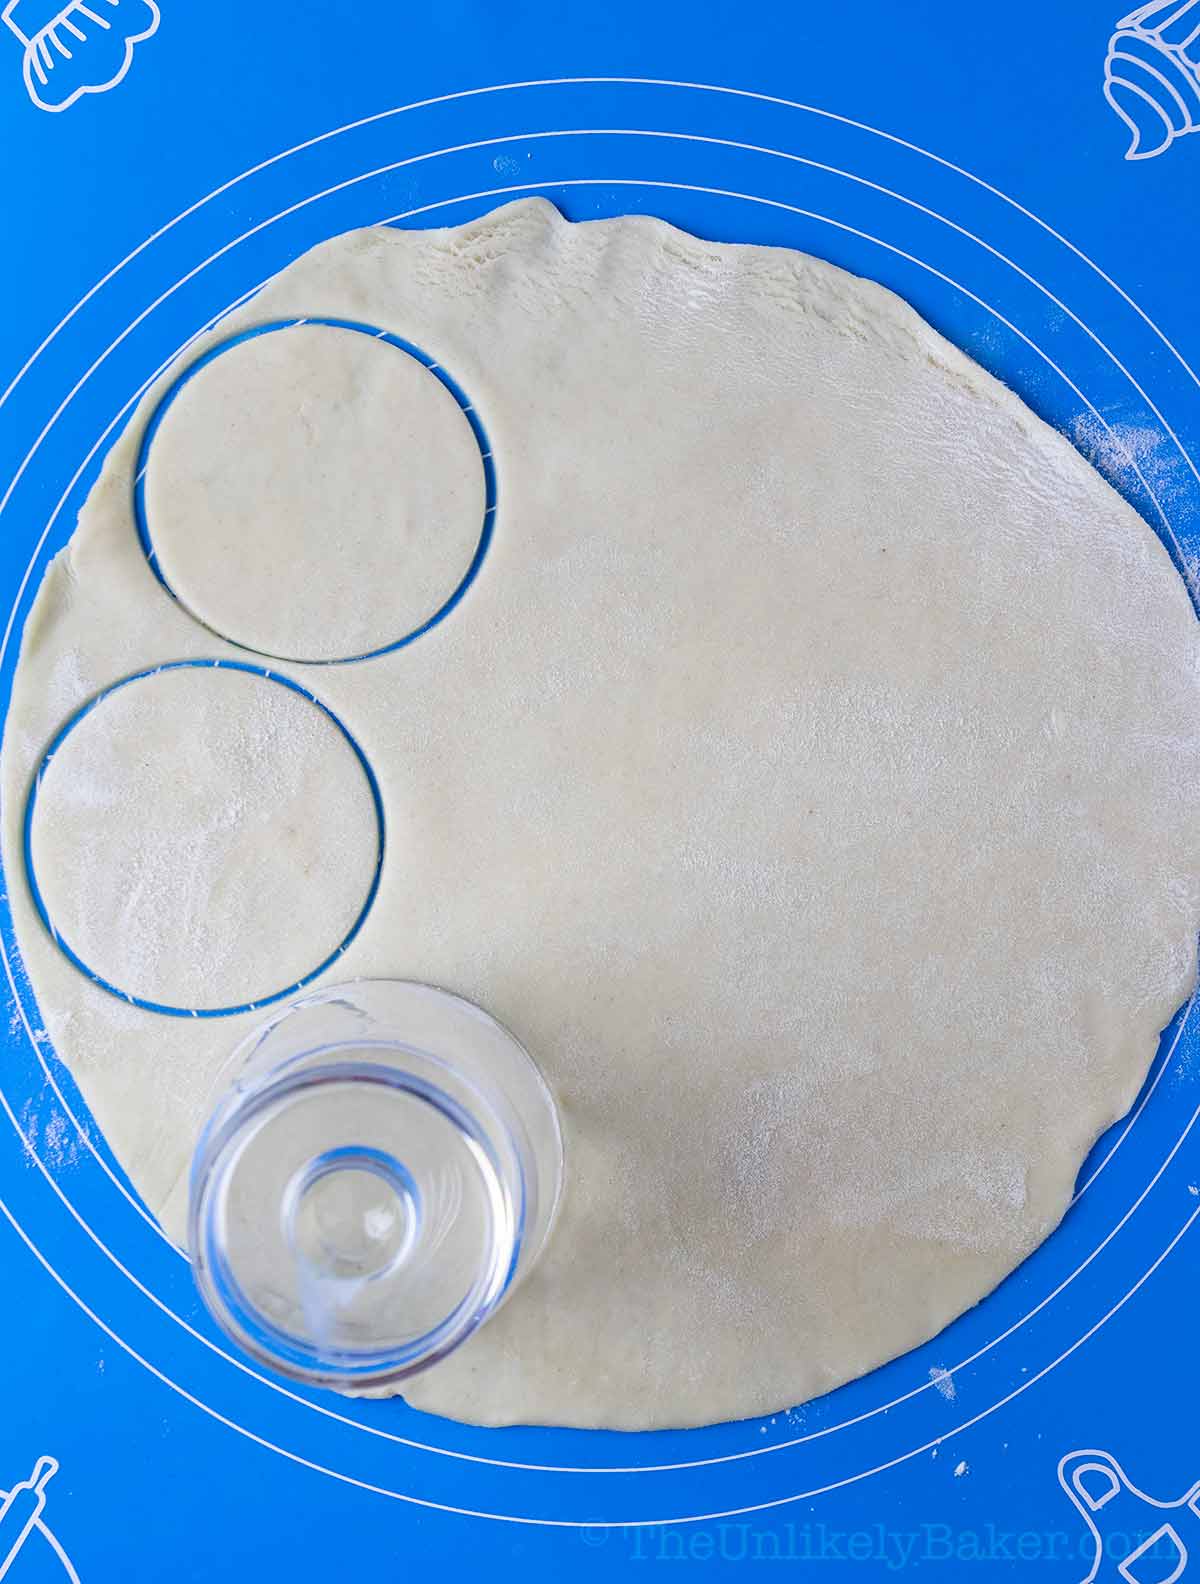 Cut puff pastry into circles.